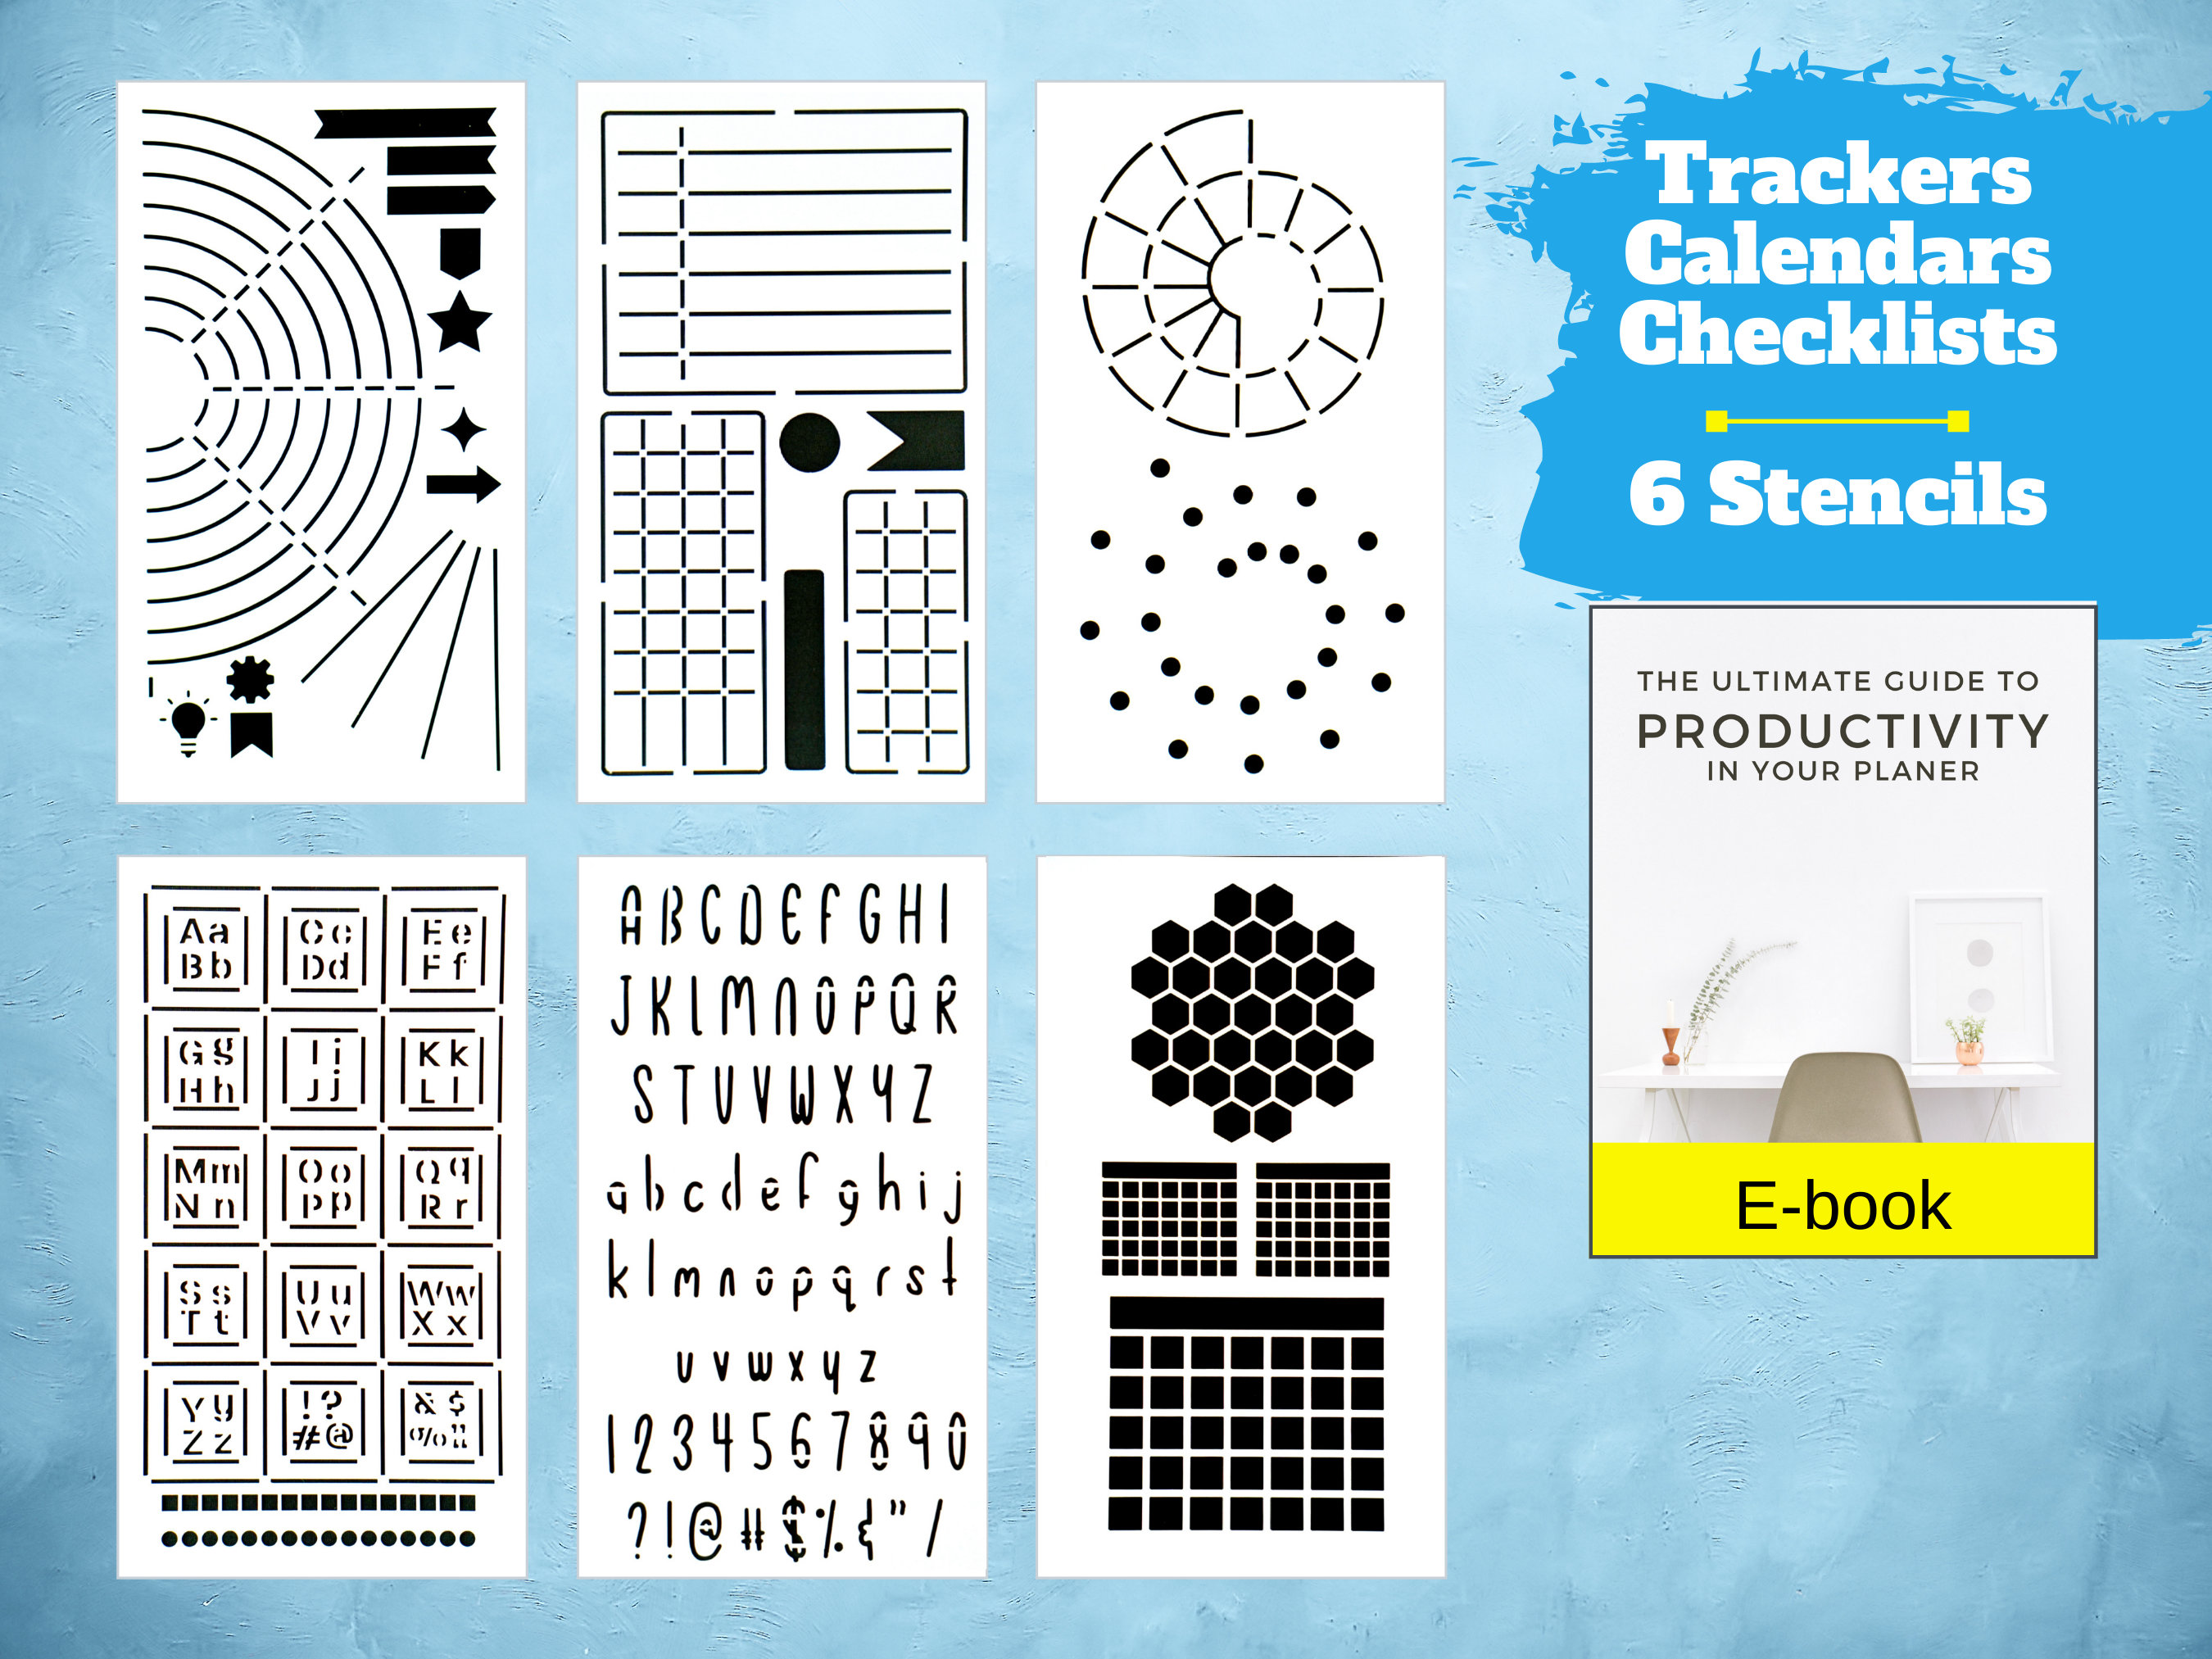 Trackers A5 Stencil, Journal Stencil, Stationery Planner Shapes and Layout  Spreads Images for Habit Tracking, Arts and Crafts Stencil 